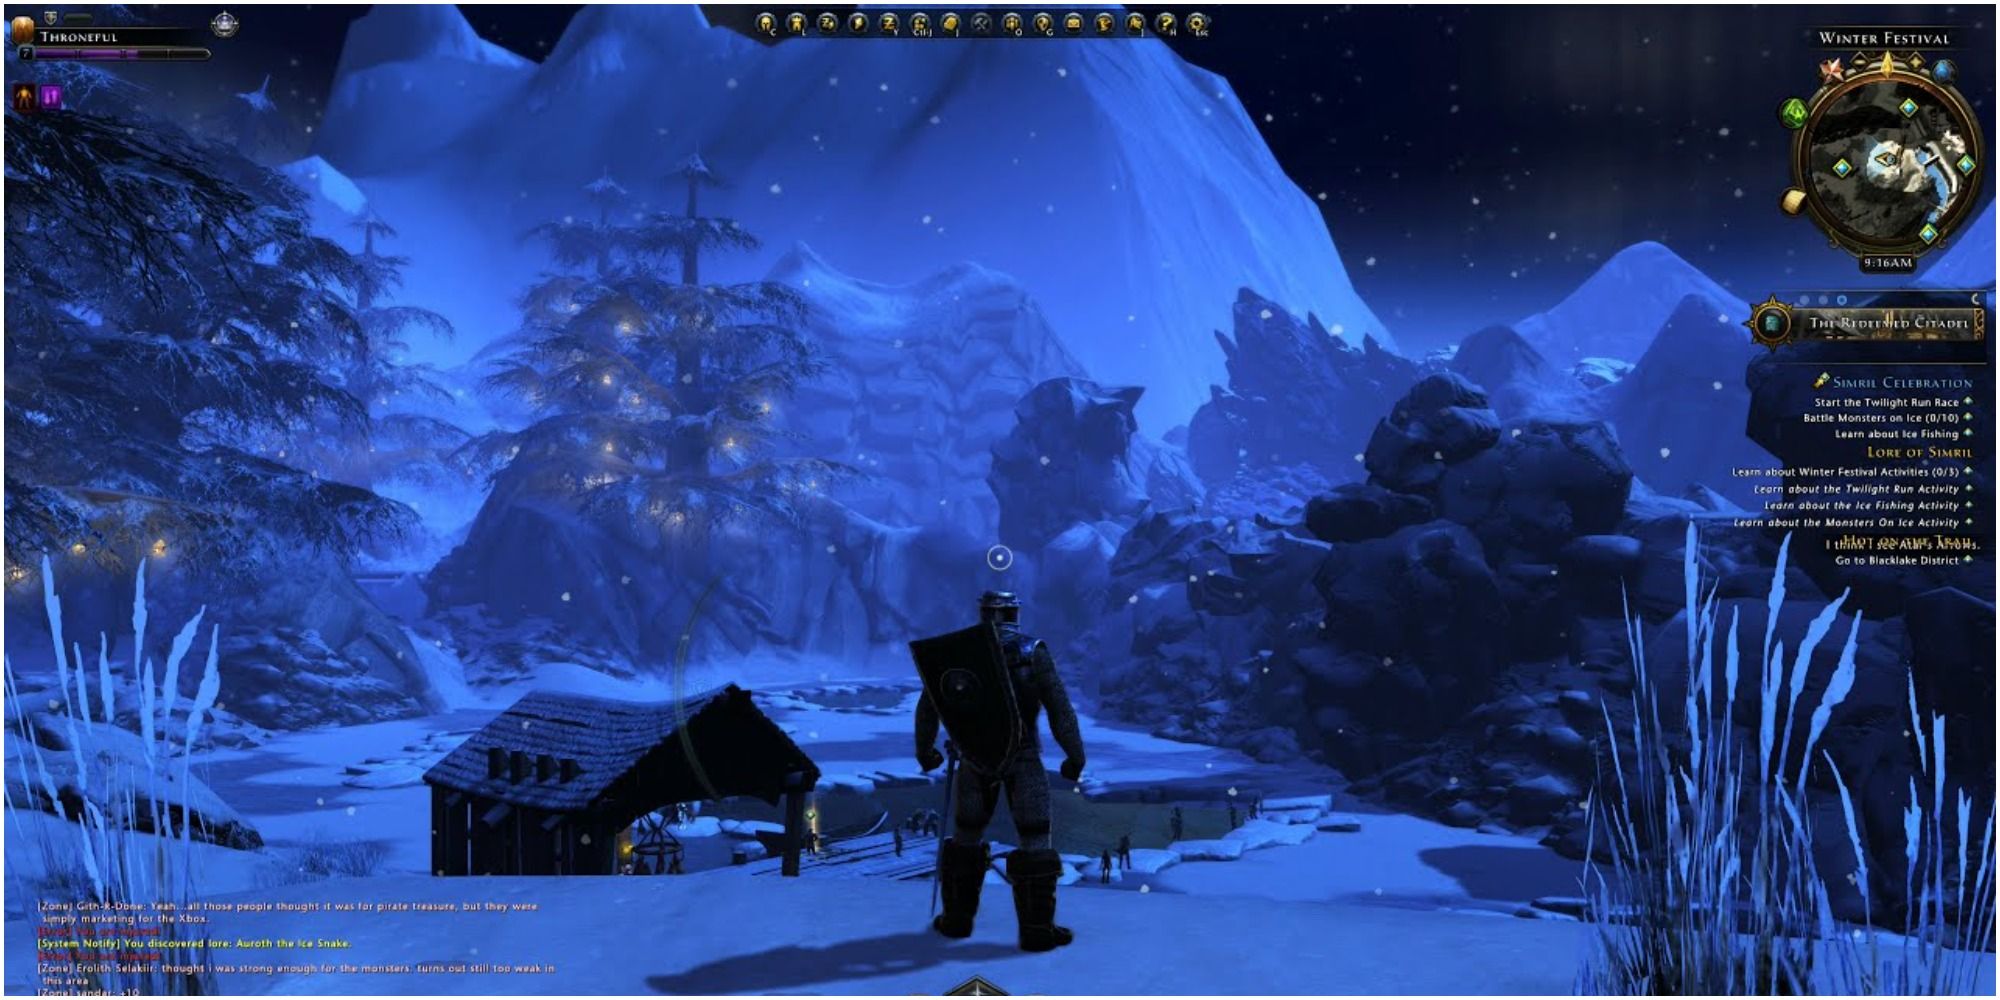 A player standing on a snowy hill in the Neverwinter videogame